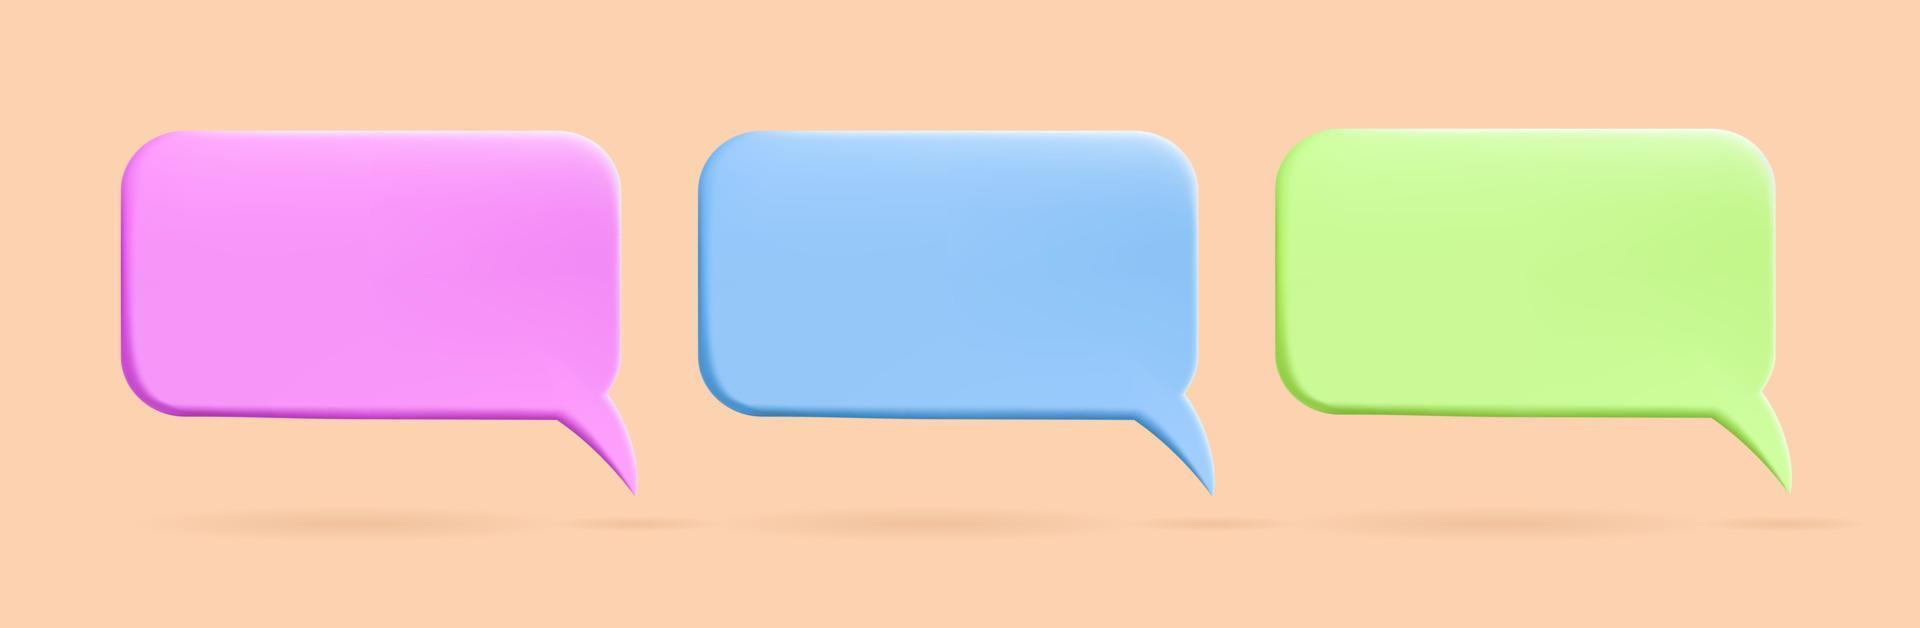 Set of colorful 3D speech bubble icons, isolated on orange background. 3d vector illustration